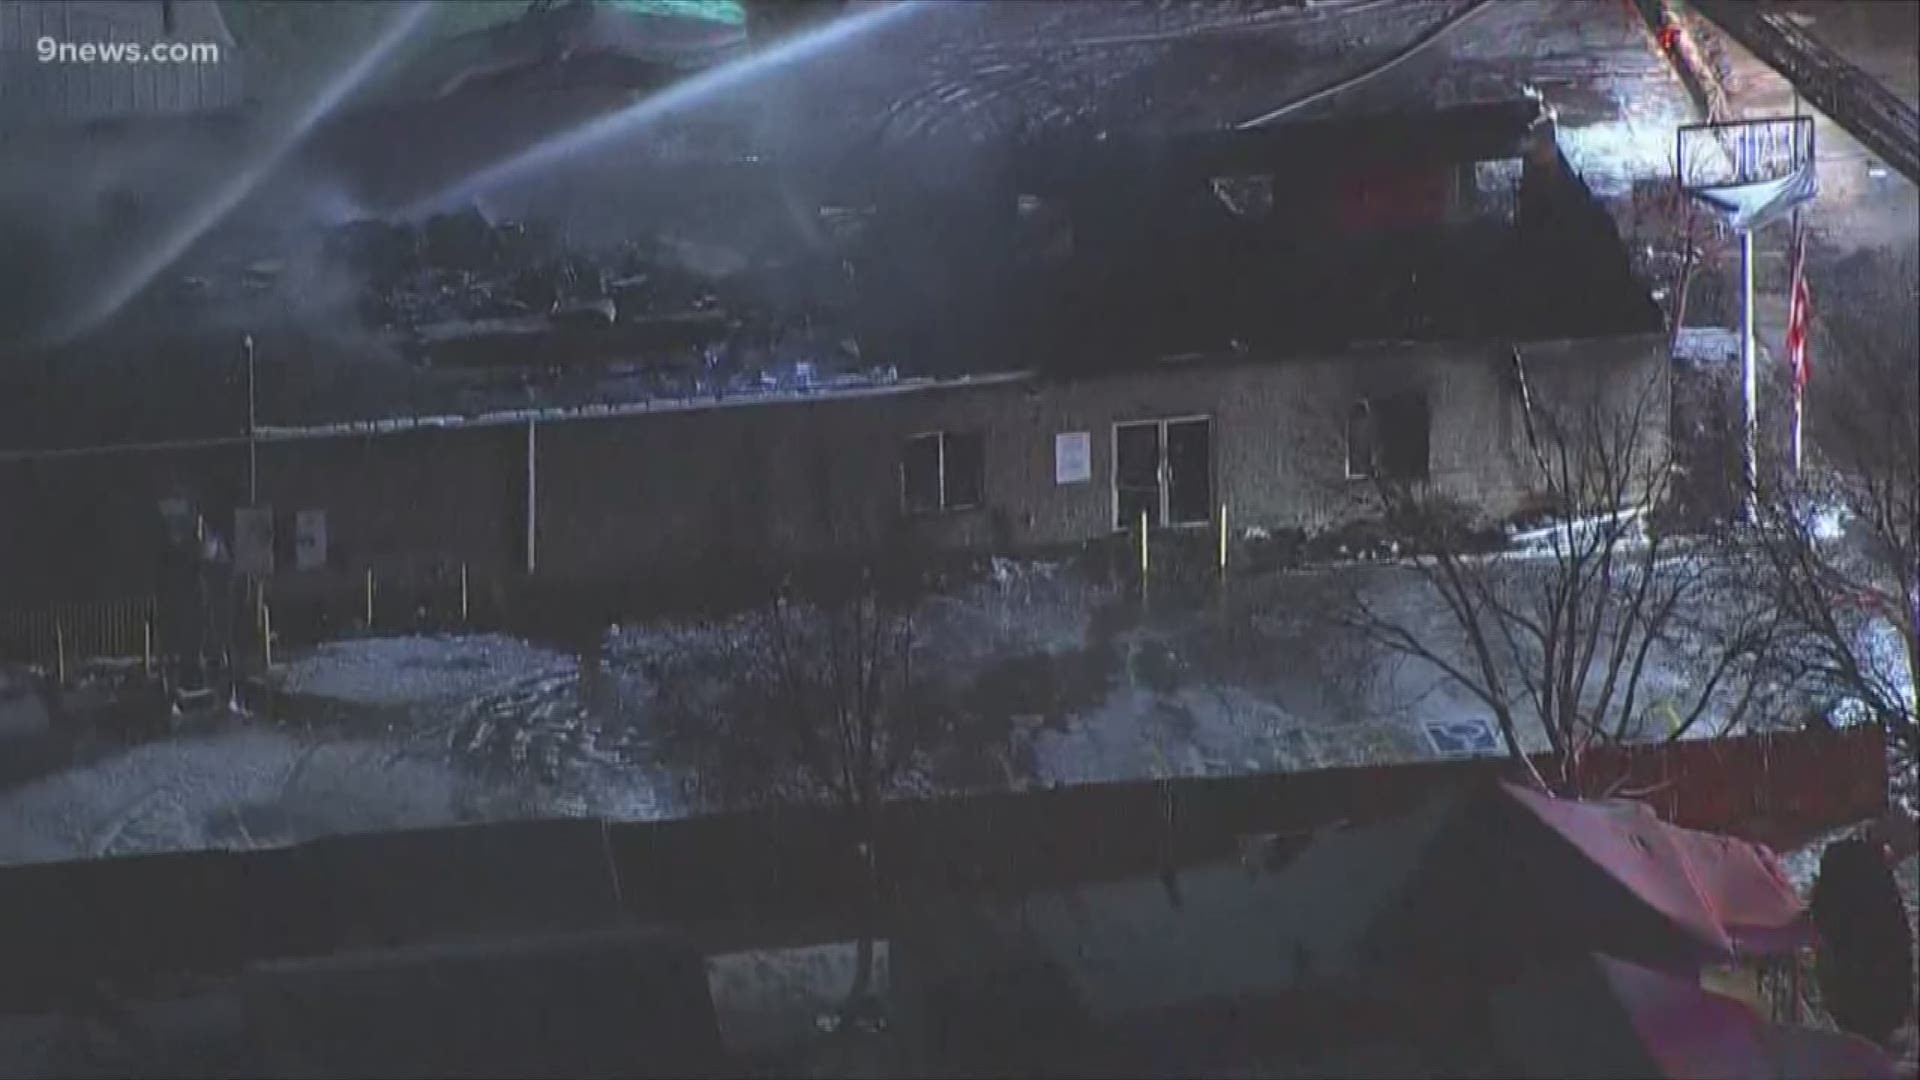 The fire broke out around 4 a.m. near Santa Fe Drive and West Dartmouth Avenue and destroyed the gun range.